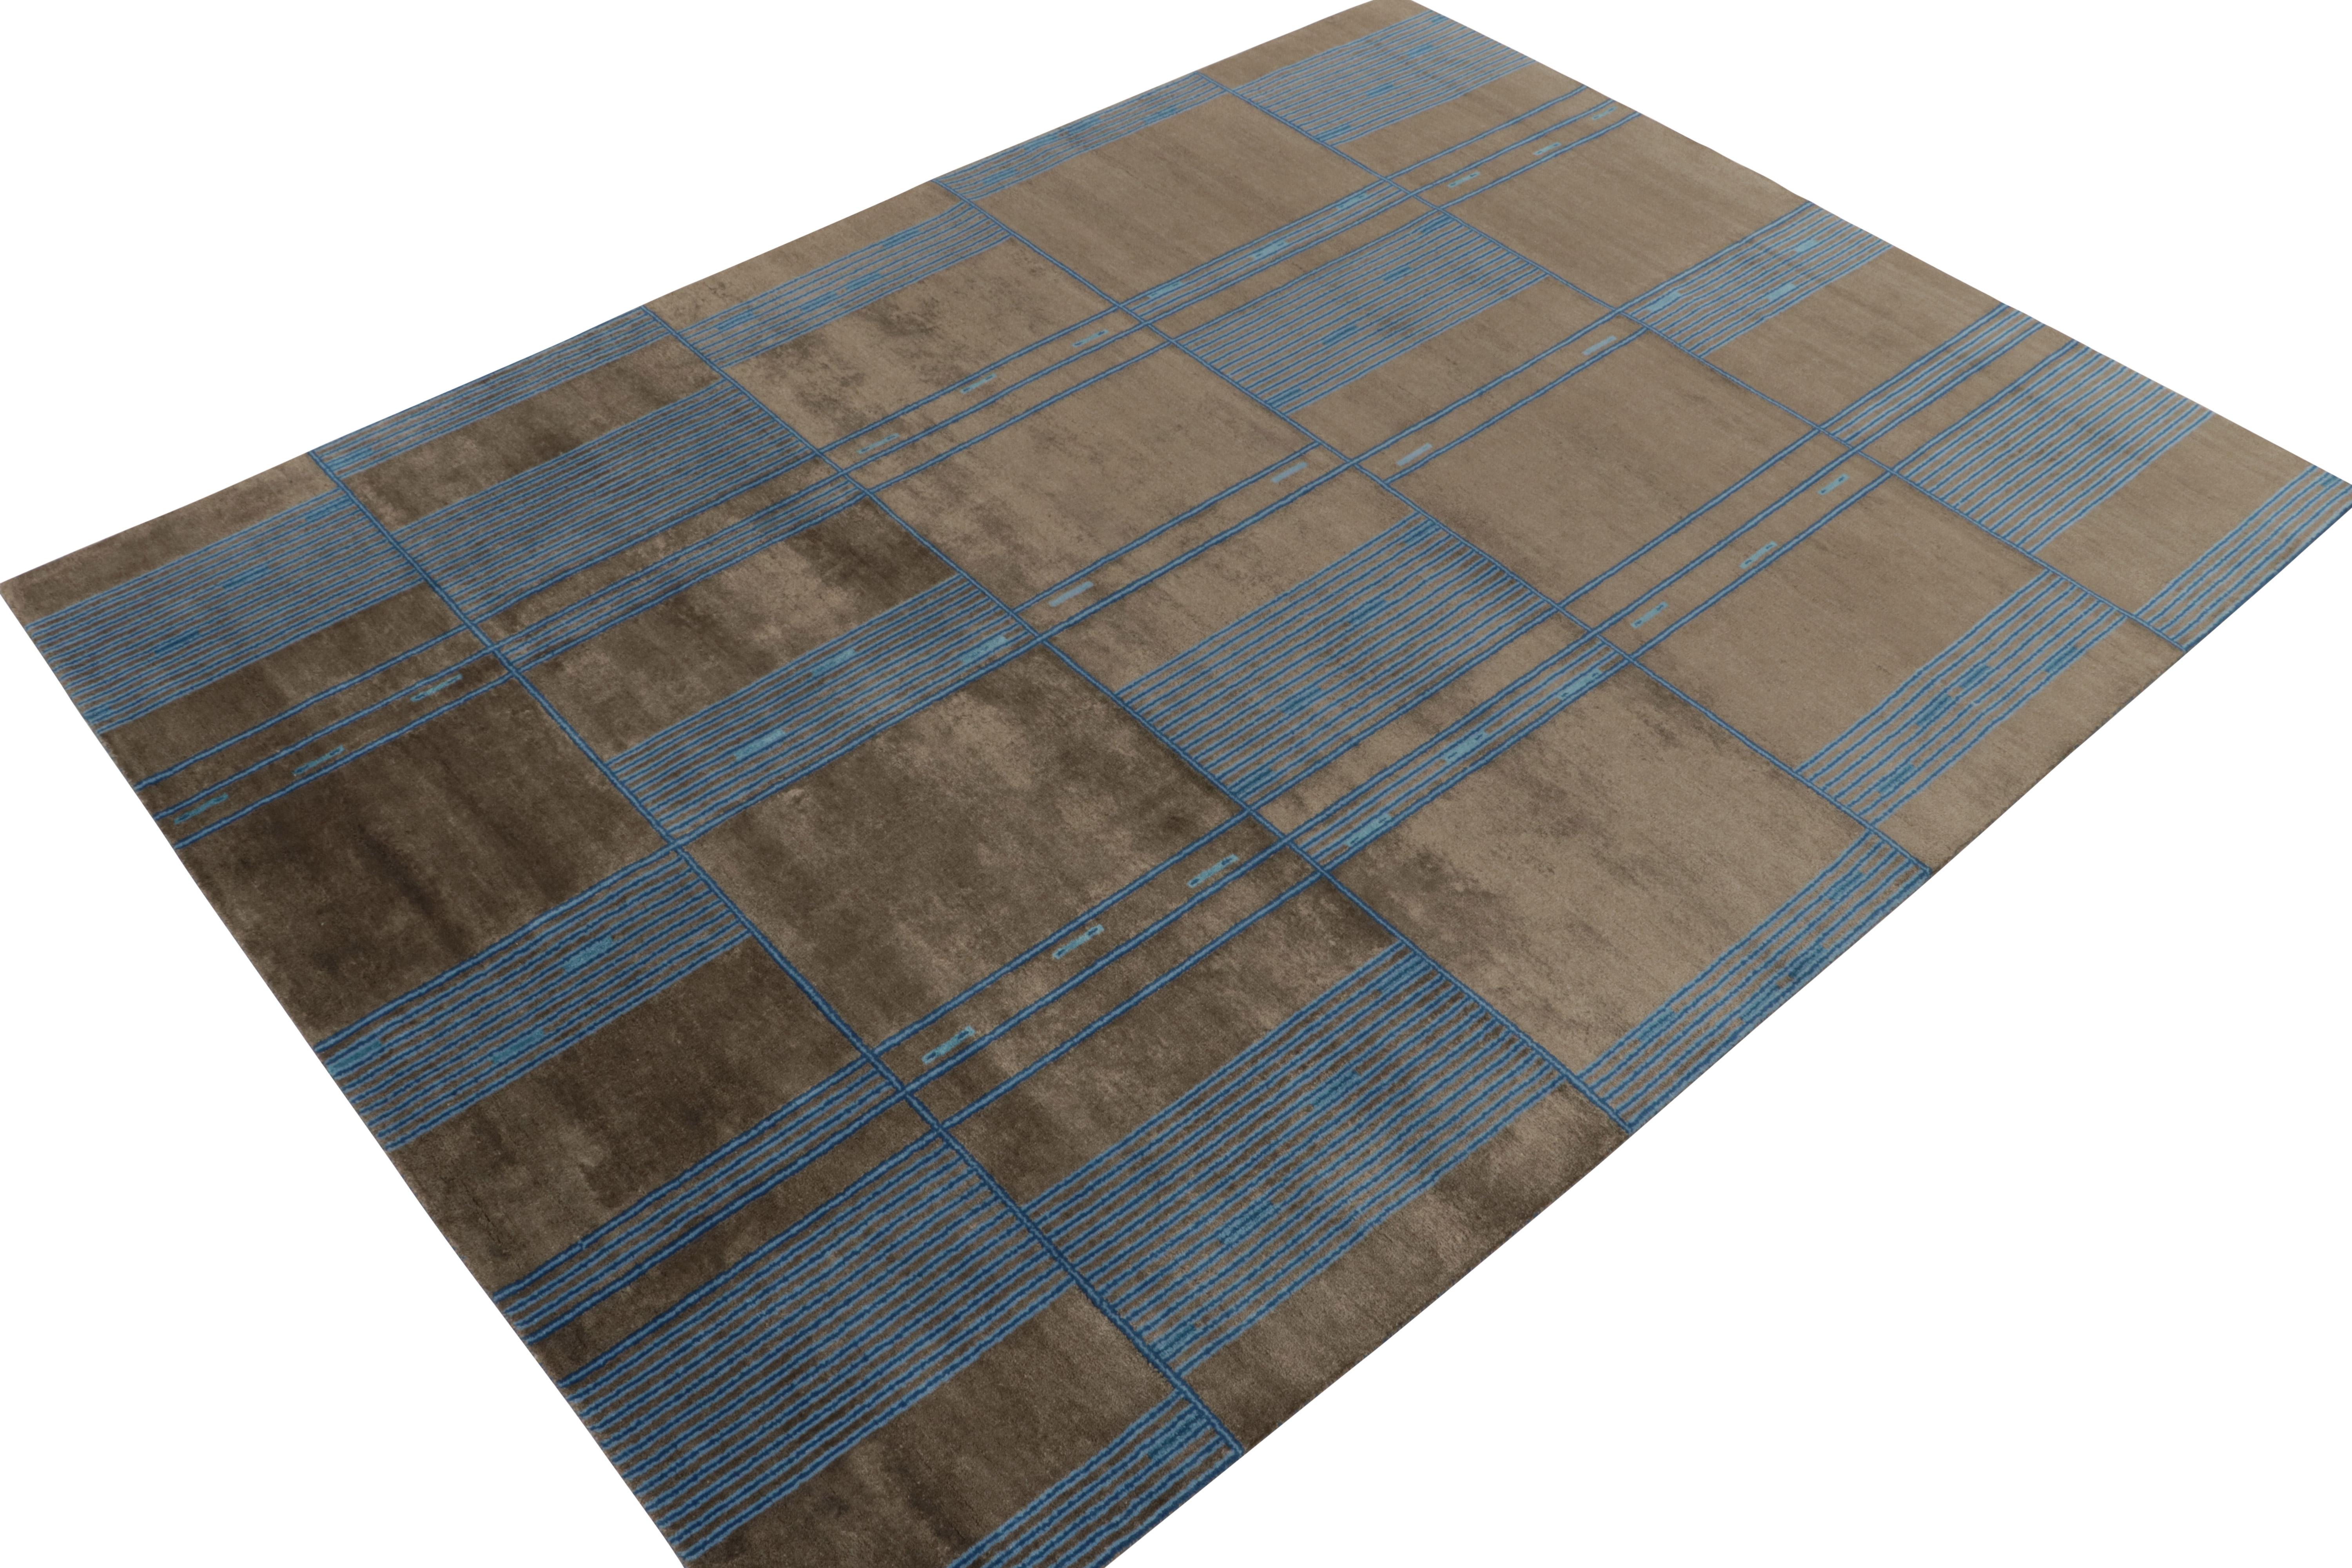 Hand-knotted in wool & silk, a 9x12 piece the inspired new Deco Collection by Rug & Kilim. 
Subtly drawing on mid-century French Deco styles, the drawing revels in a smart geometric pattern of mature brown & blue geometric pattern. Keen eyes will